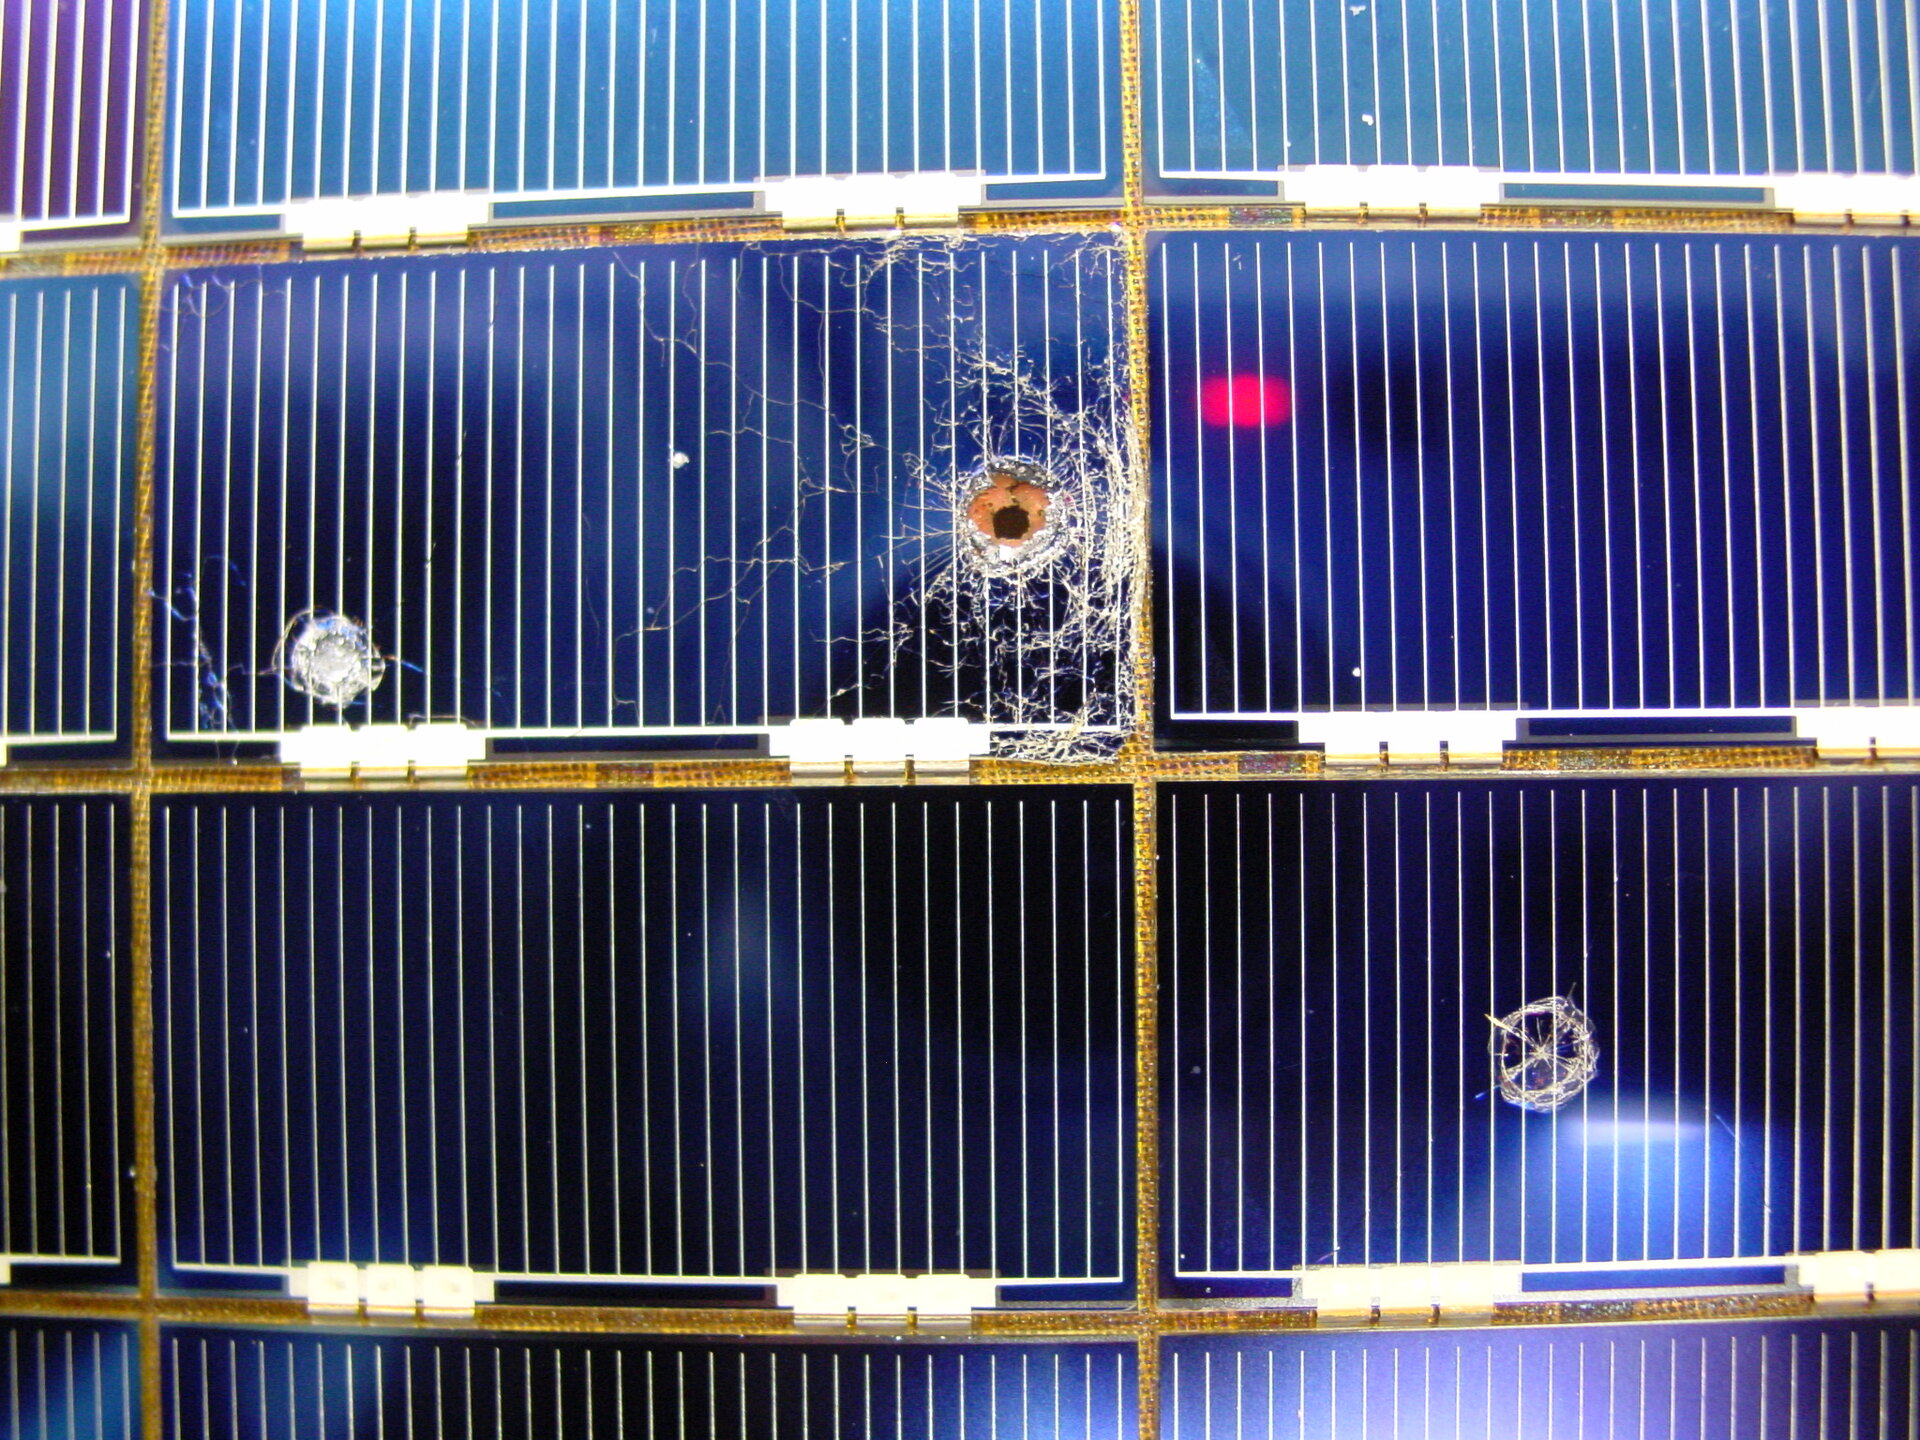 ESA built-solar cells retrieved from the Hubble Space Telescope in 2002